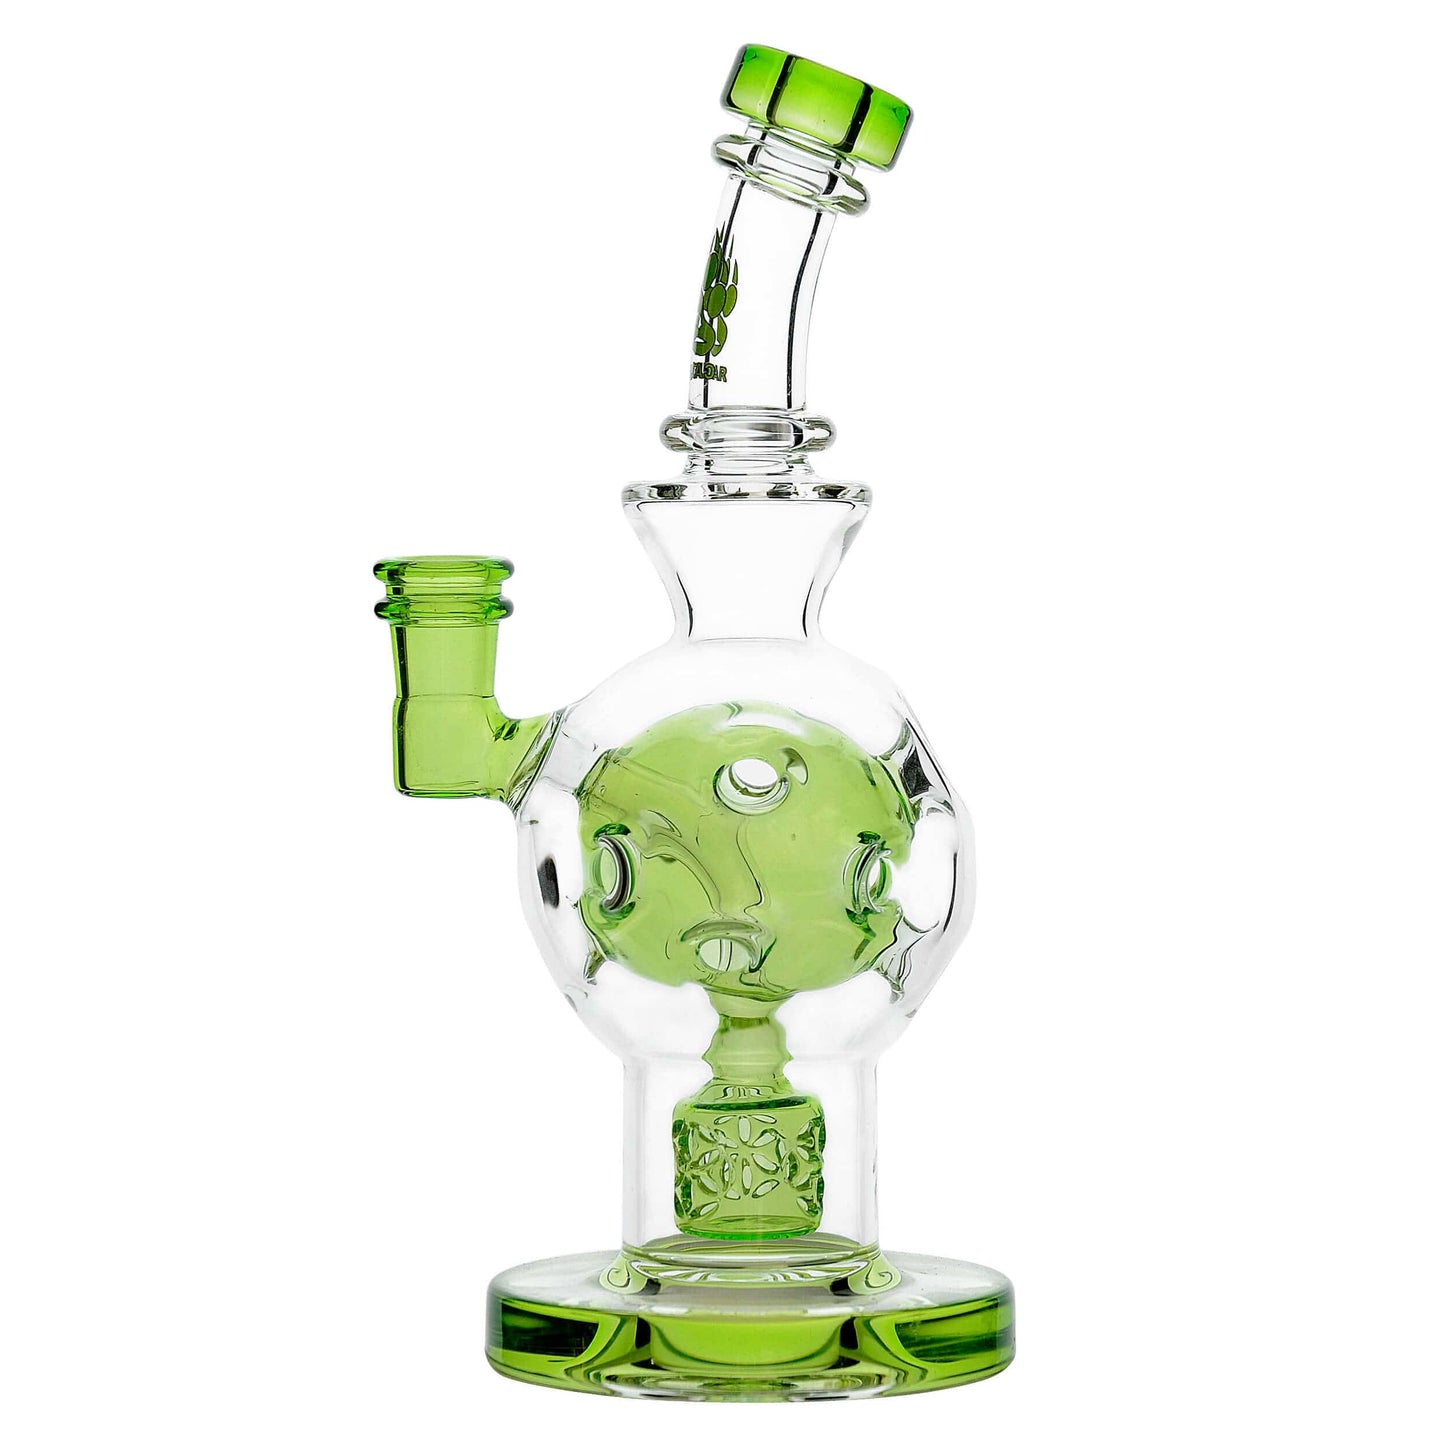 calibearofficial DAB RIG Lime Green / 8 Inch EXOSPHERE